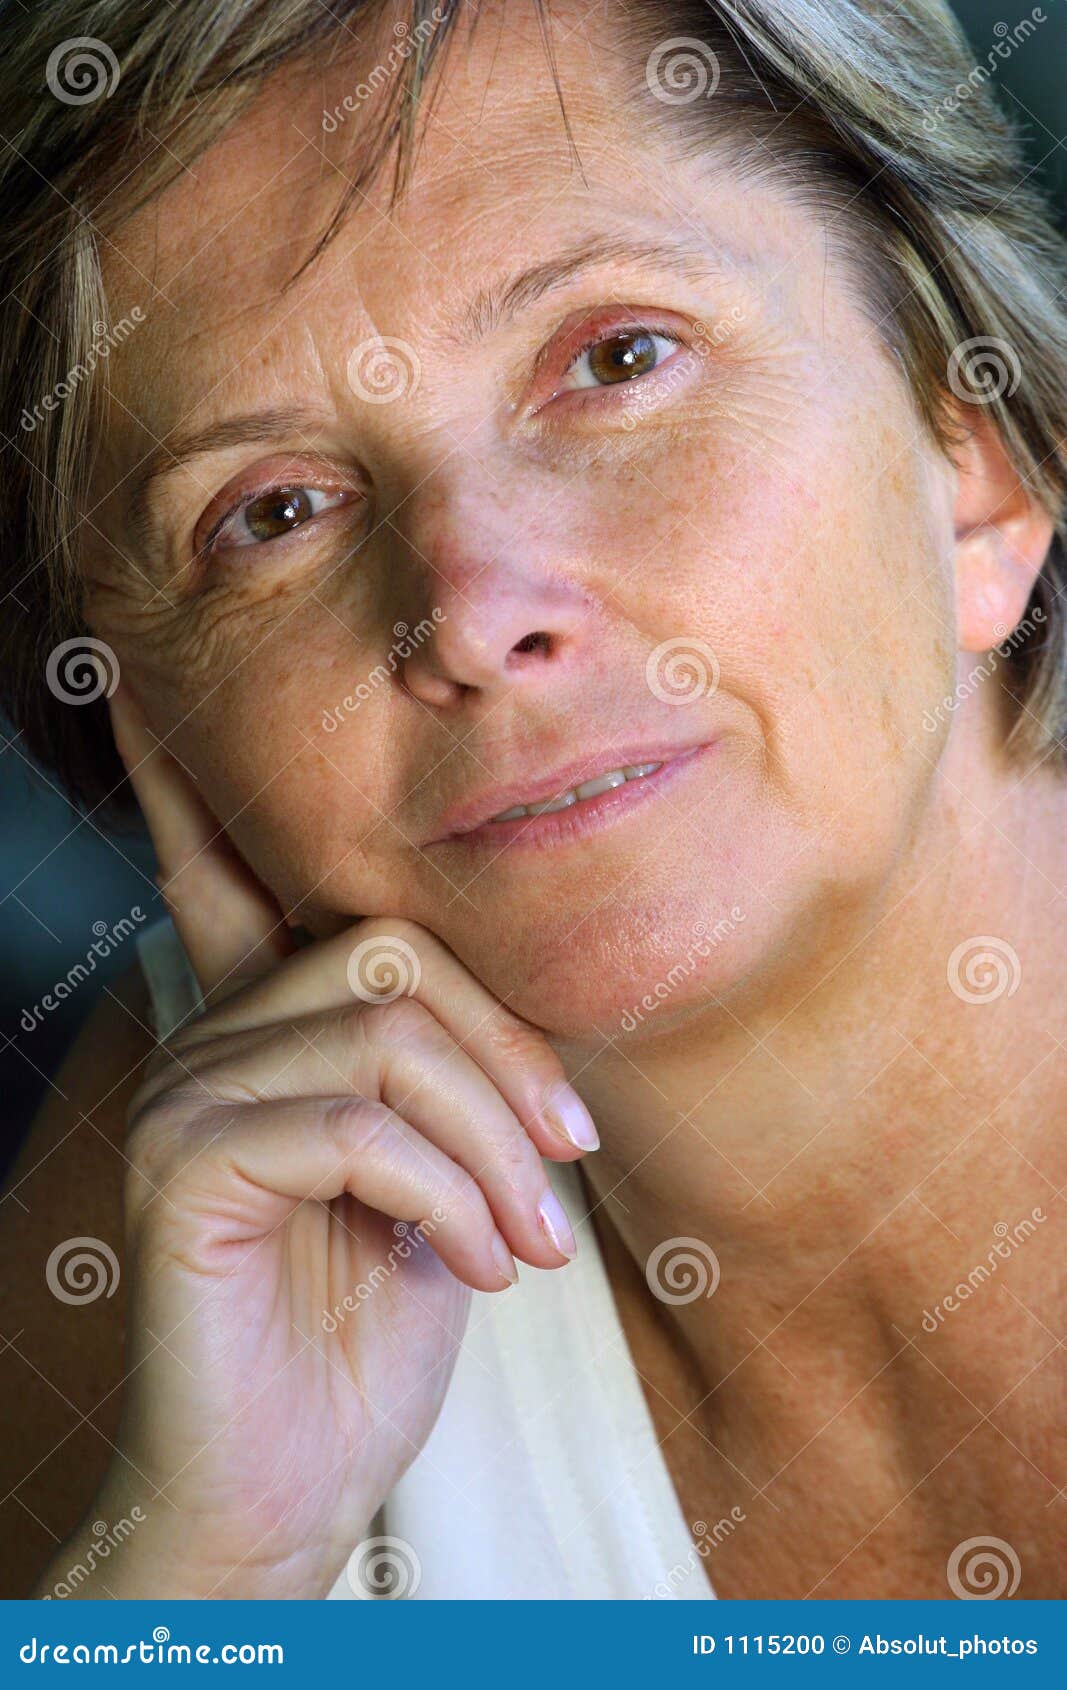 middleaged woman looking ahead